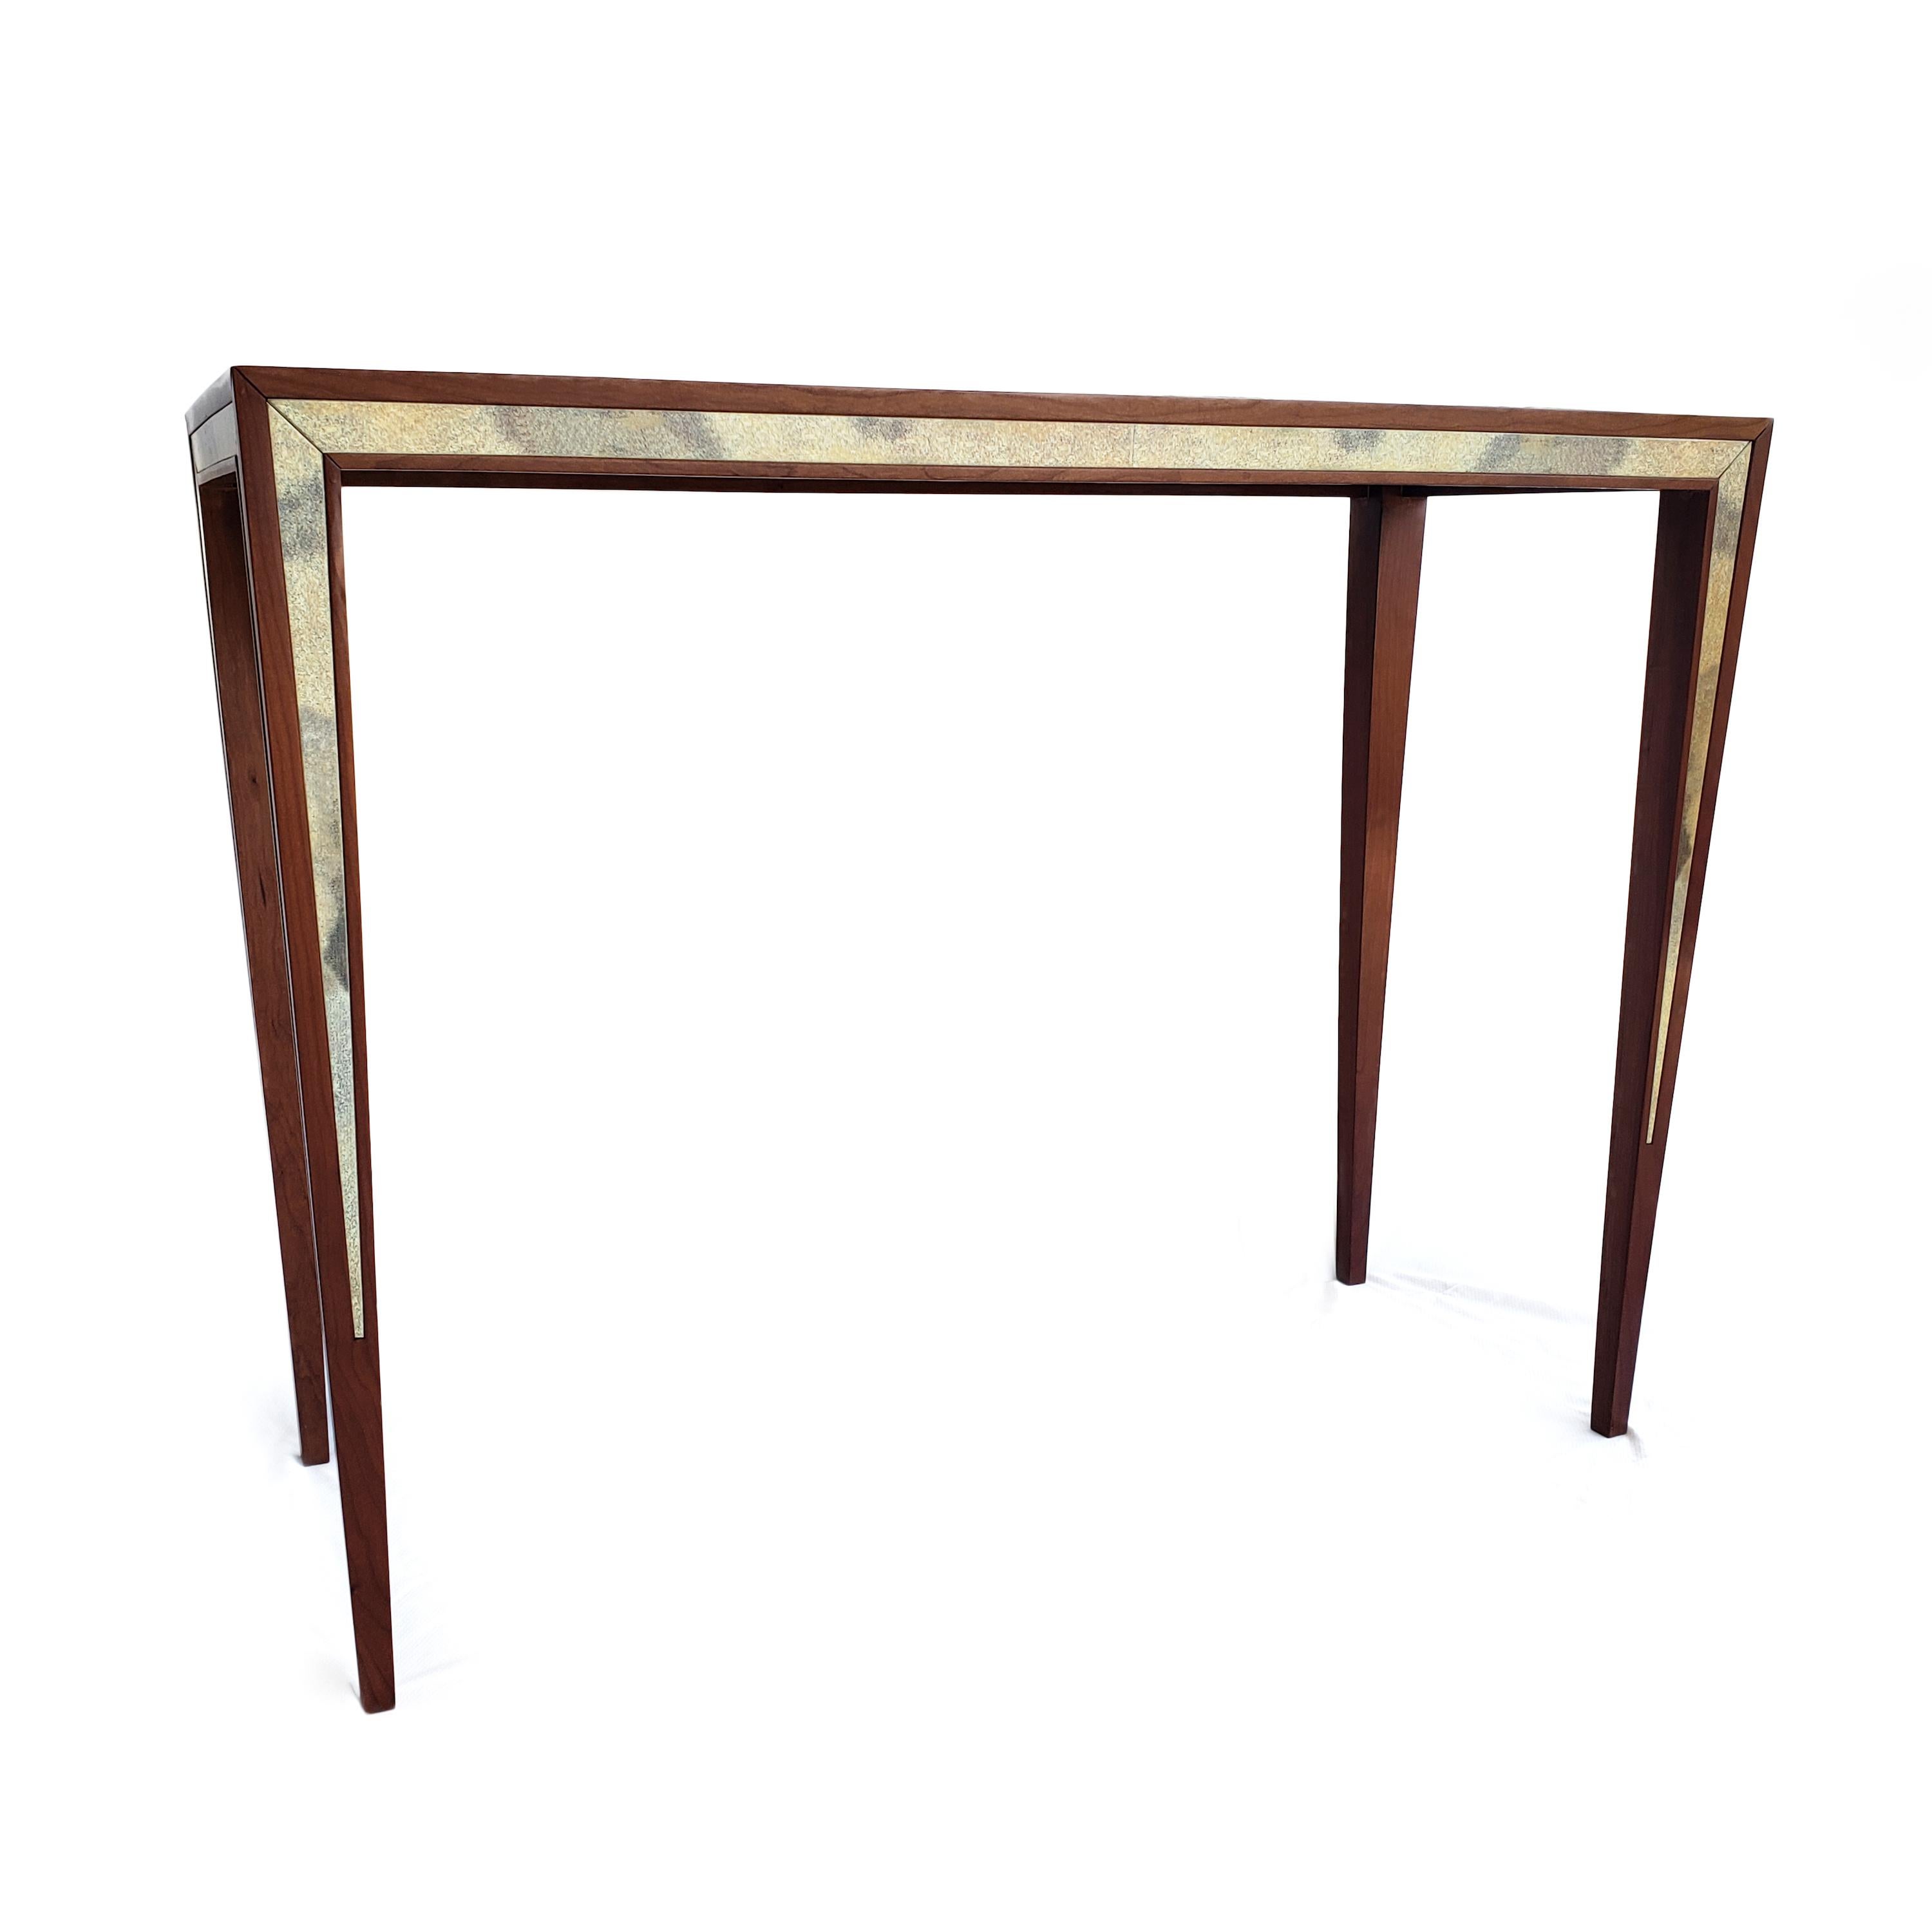 Italian Console Table by Gio Ponti and Paolo de Poli for Neoponti